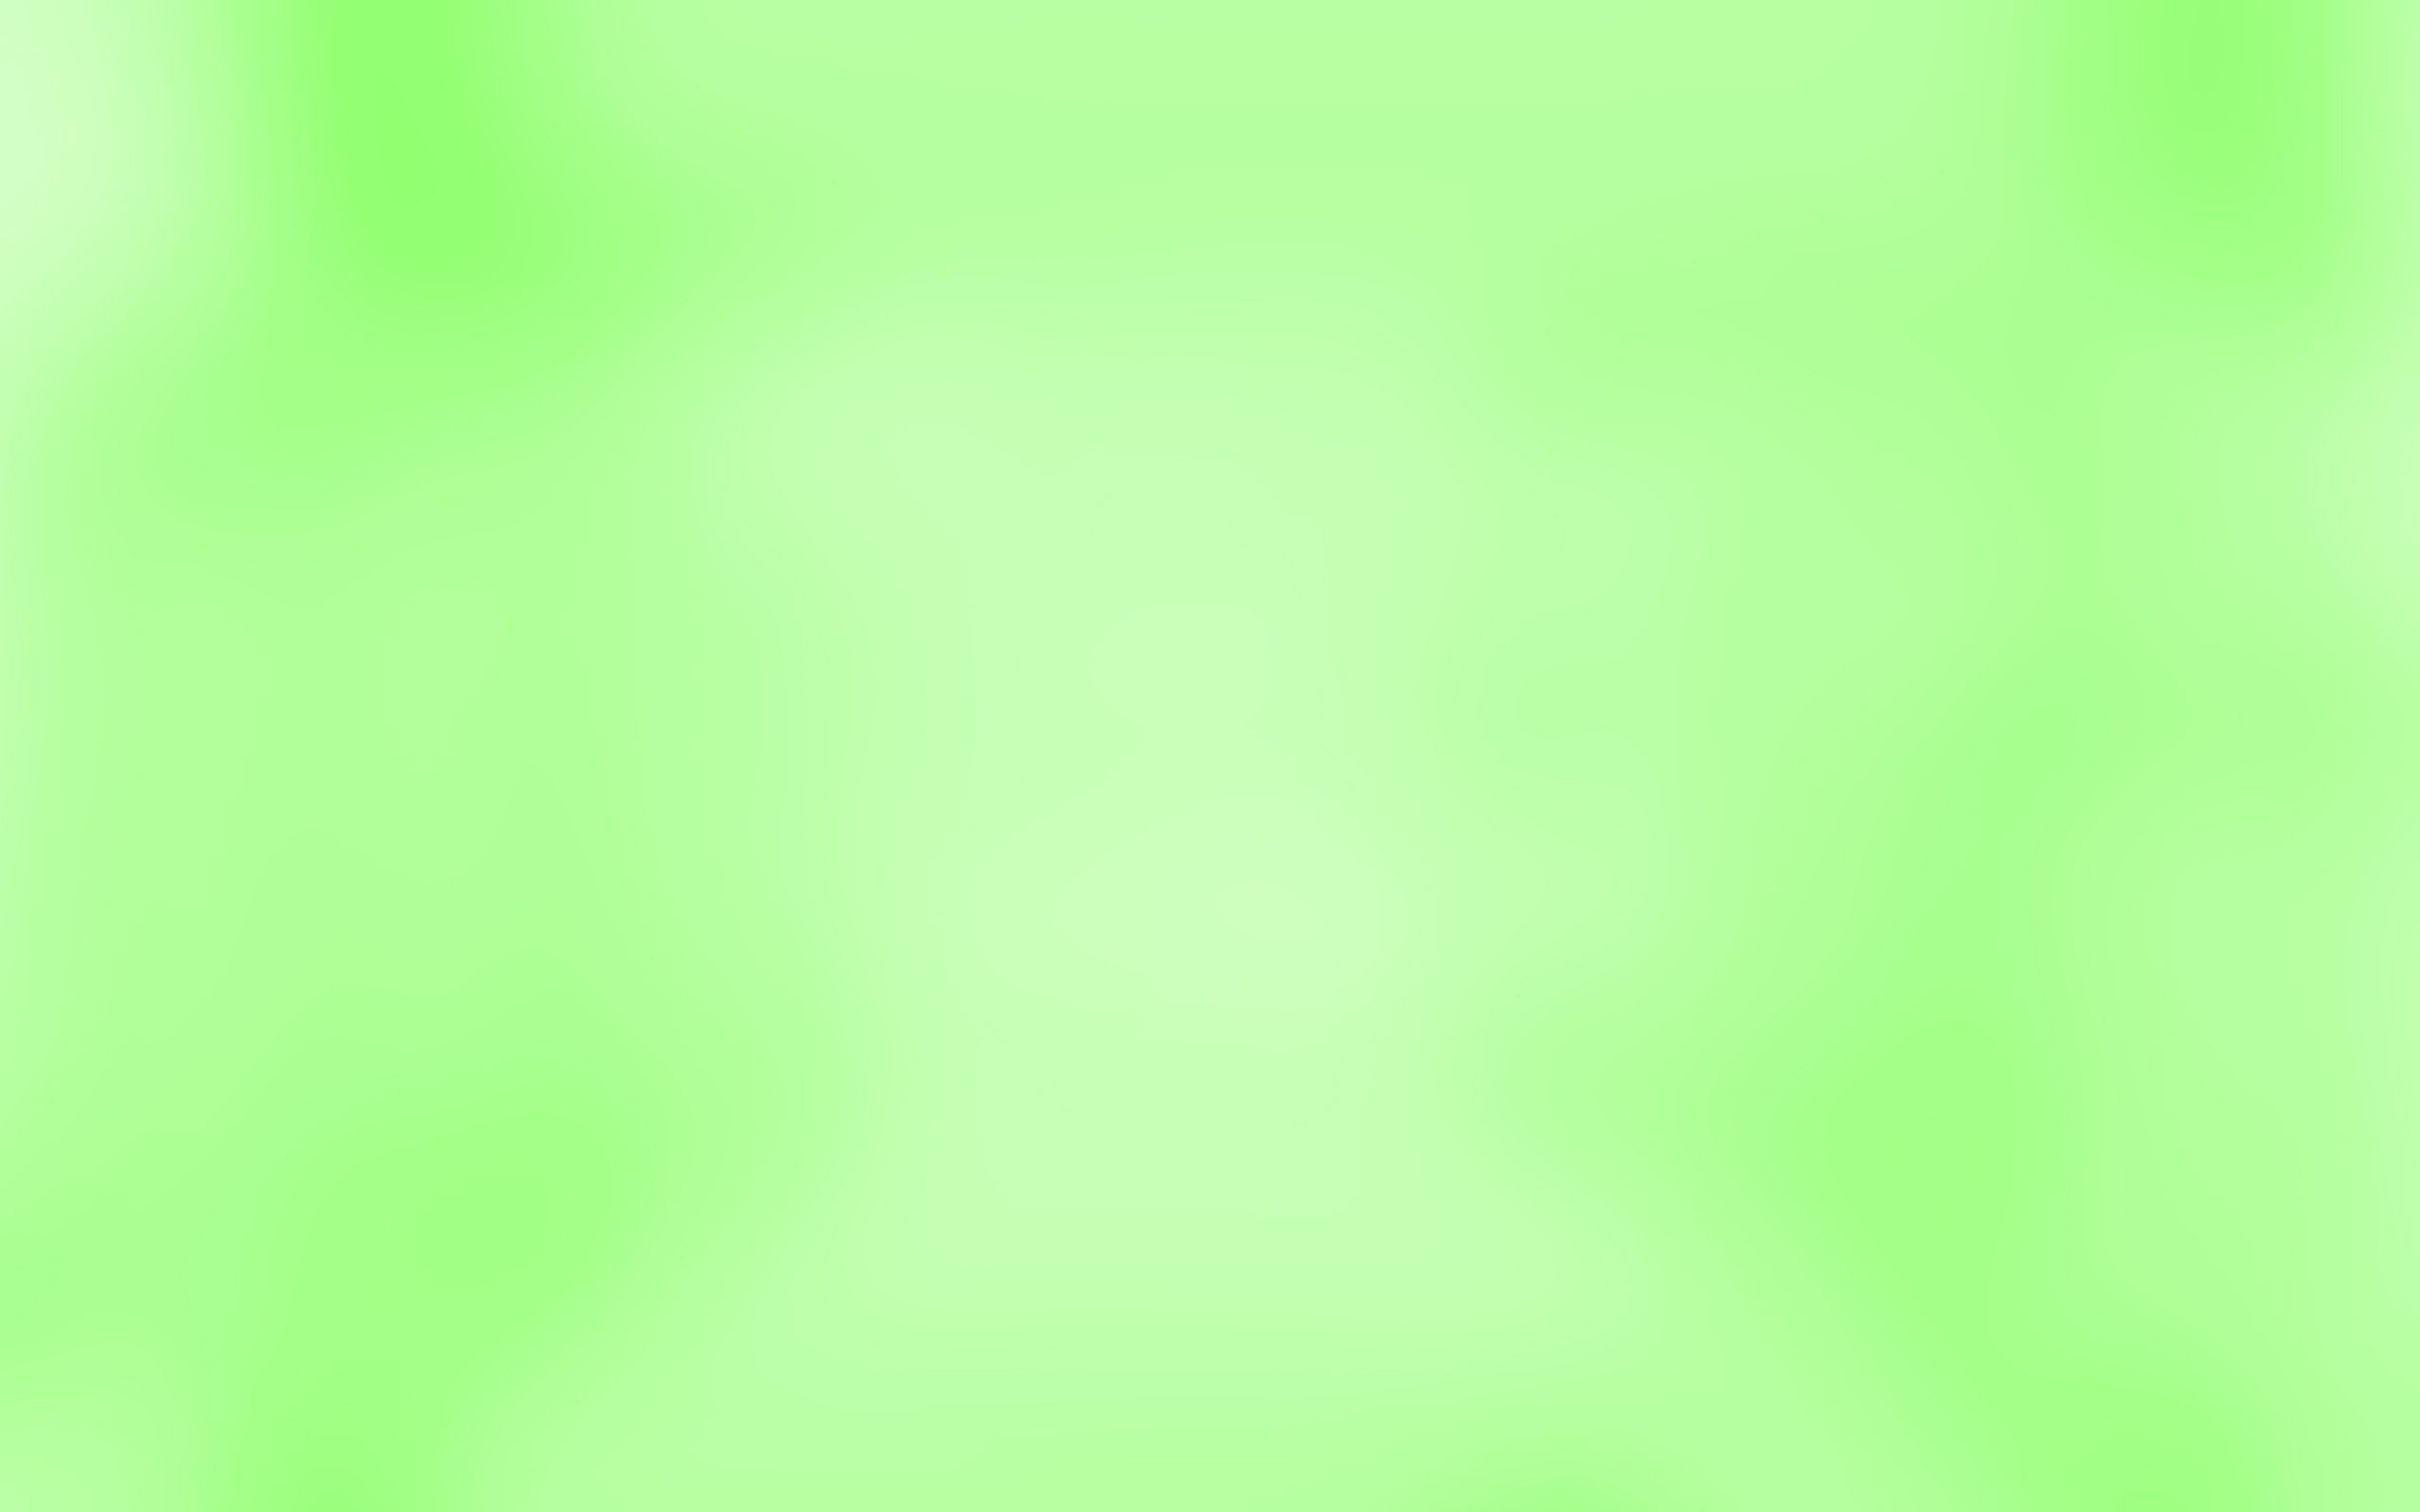 Green Backgrounds Wallpapers